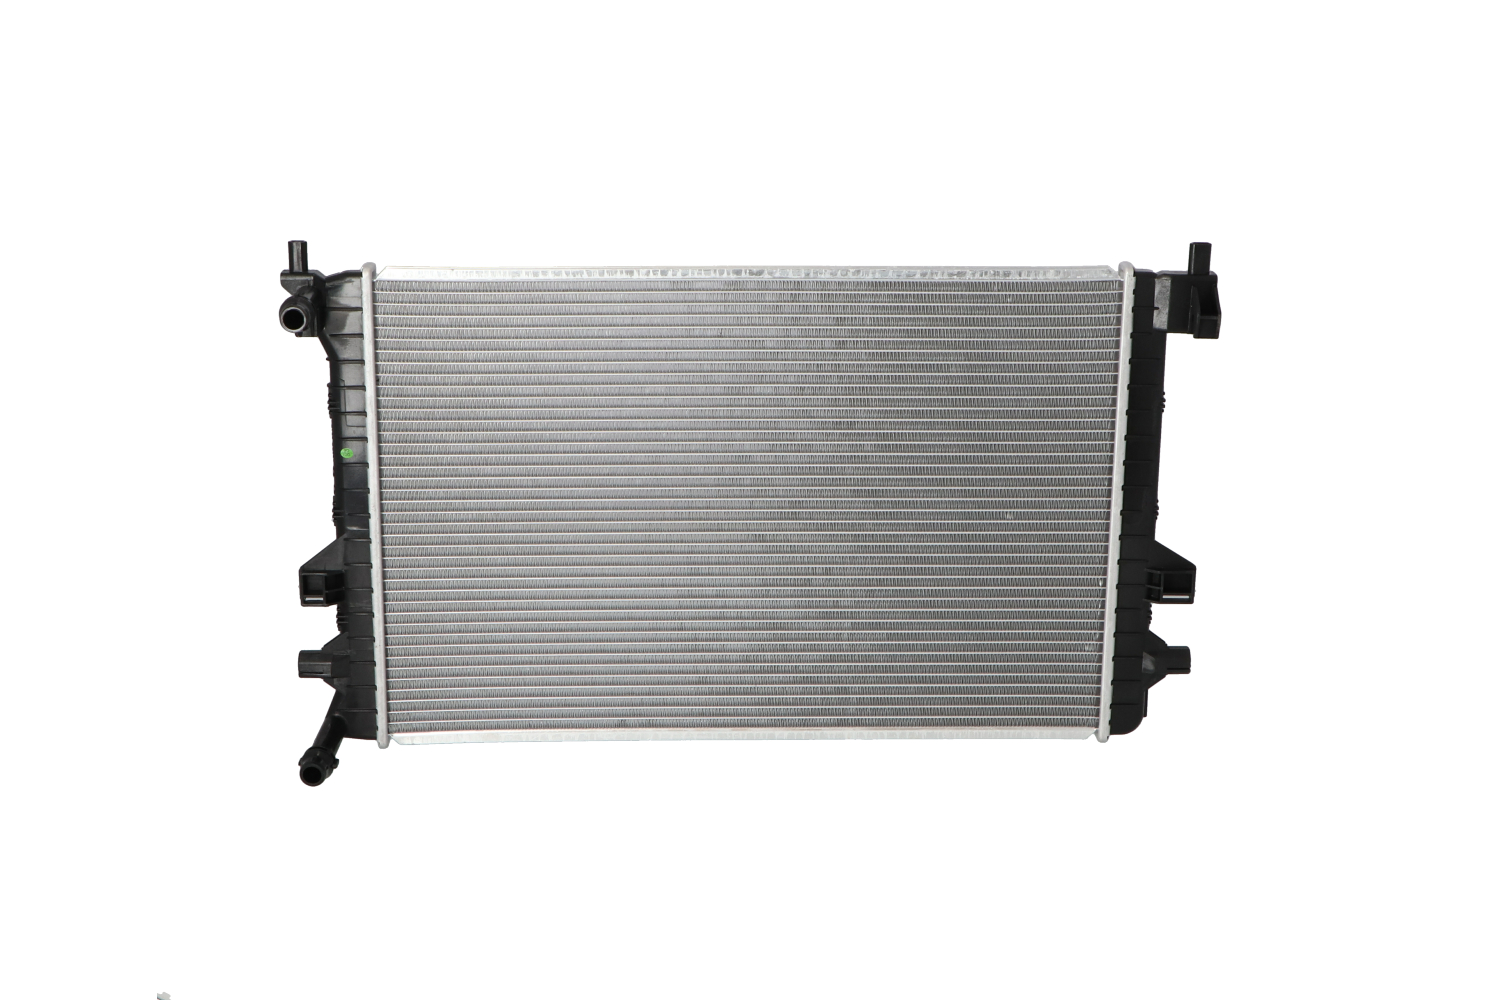 NRF 58471 Engine radiator Aluminium, 620 x 398 x 16 mm, with seal ring, Brazed cooling fins